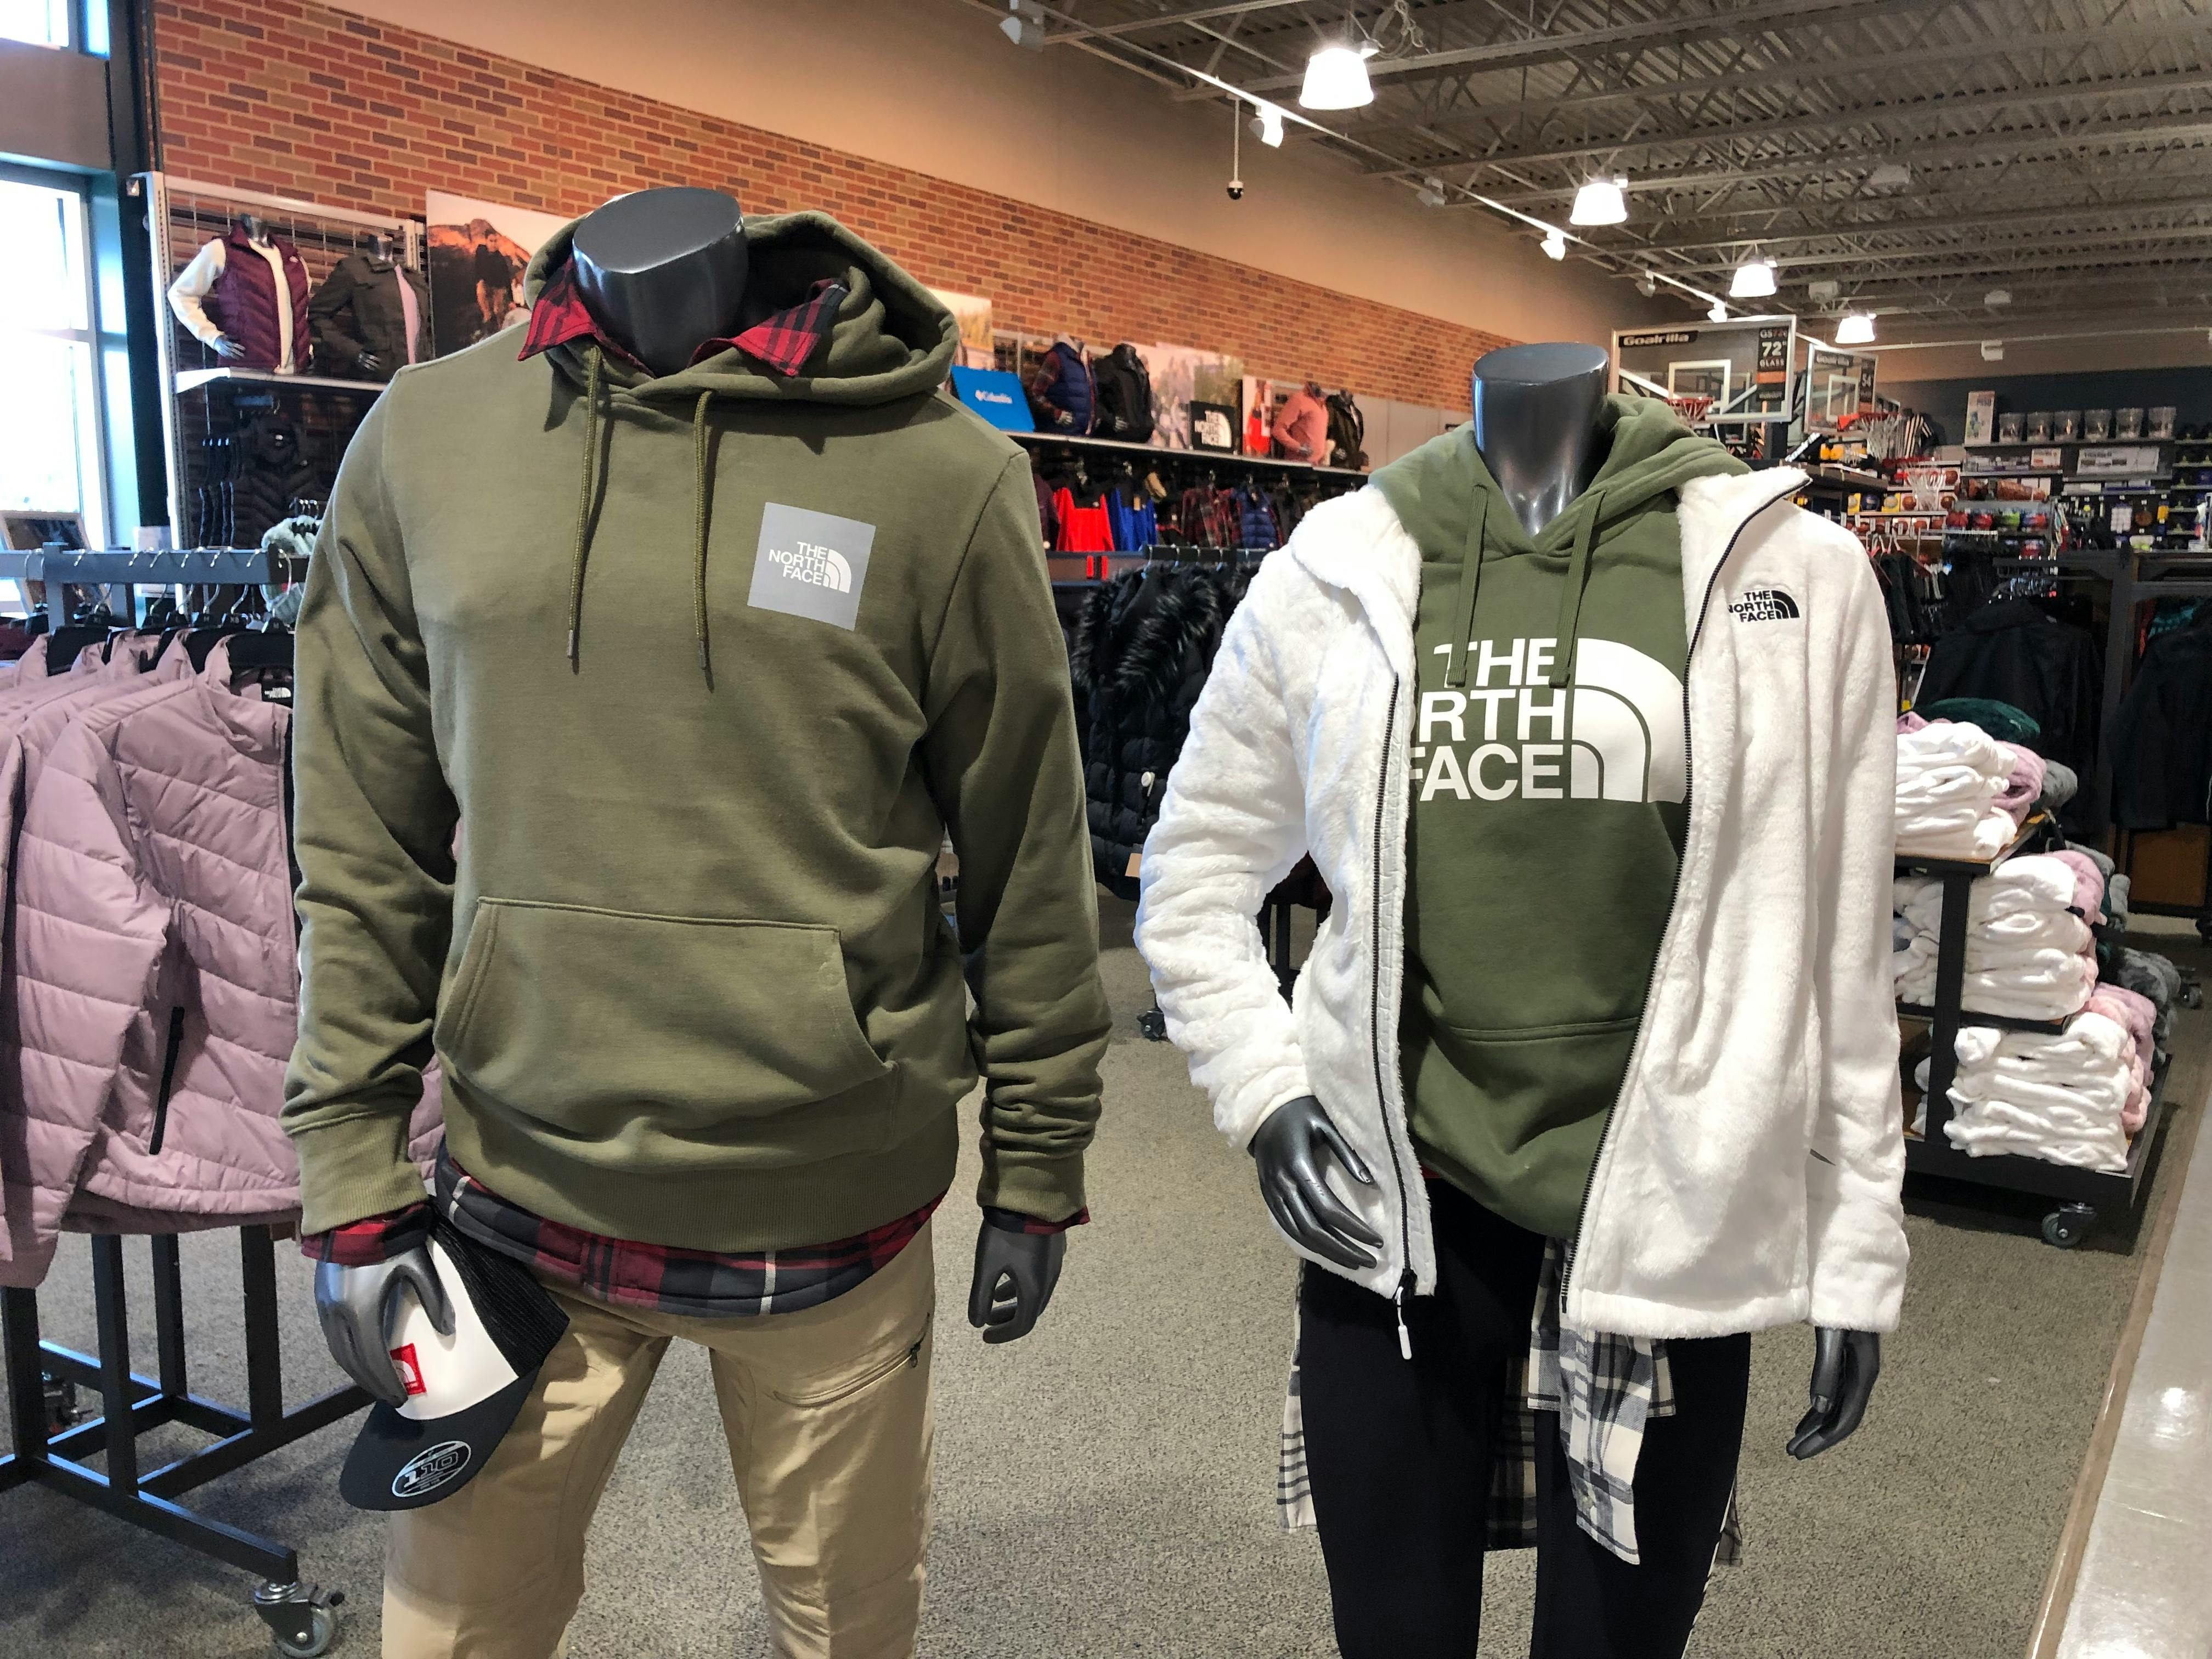 Logisch Fokken argument 15 Ways to Find The North Face Sales & Deals - The Krazy Coupon Lady